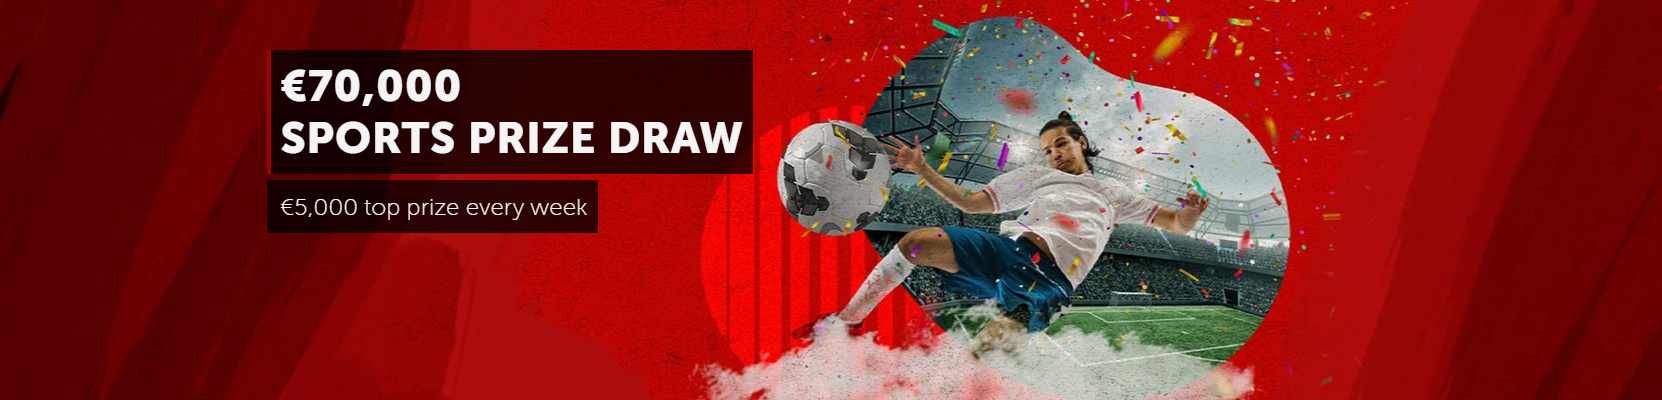 bookmaker betsafe sports prize draw offer